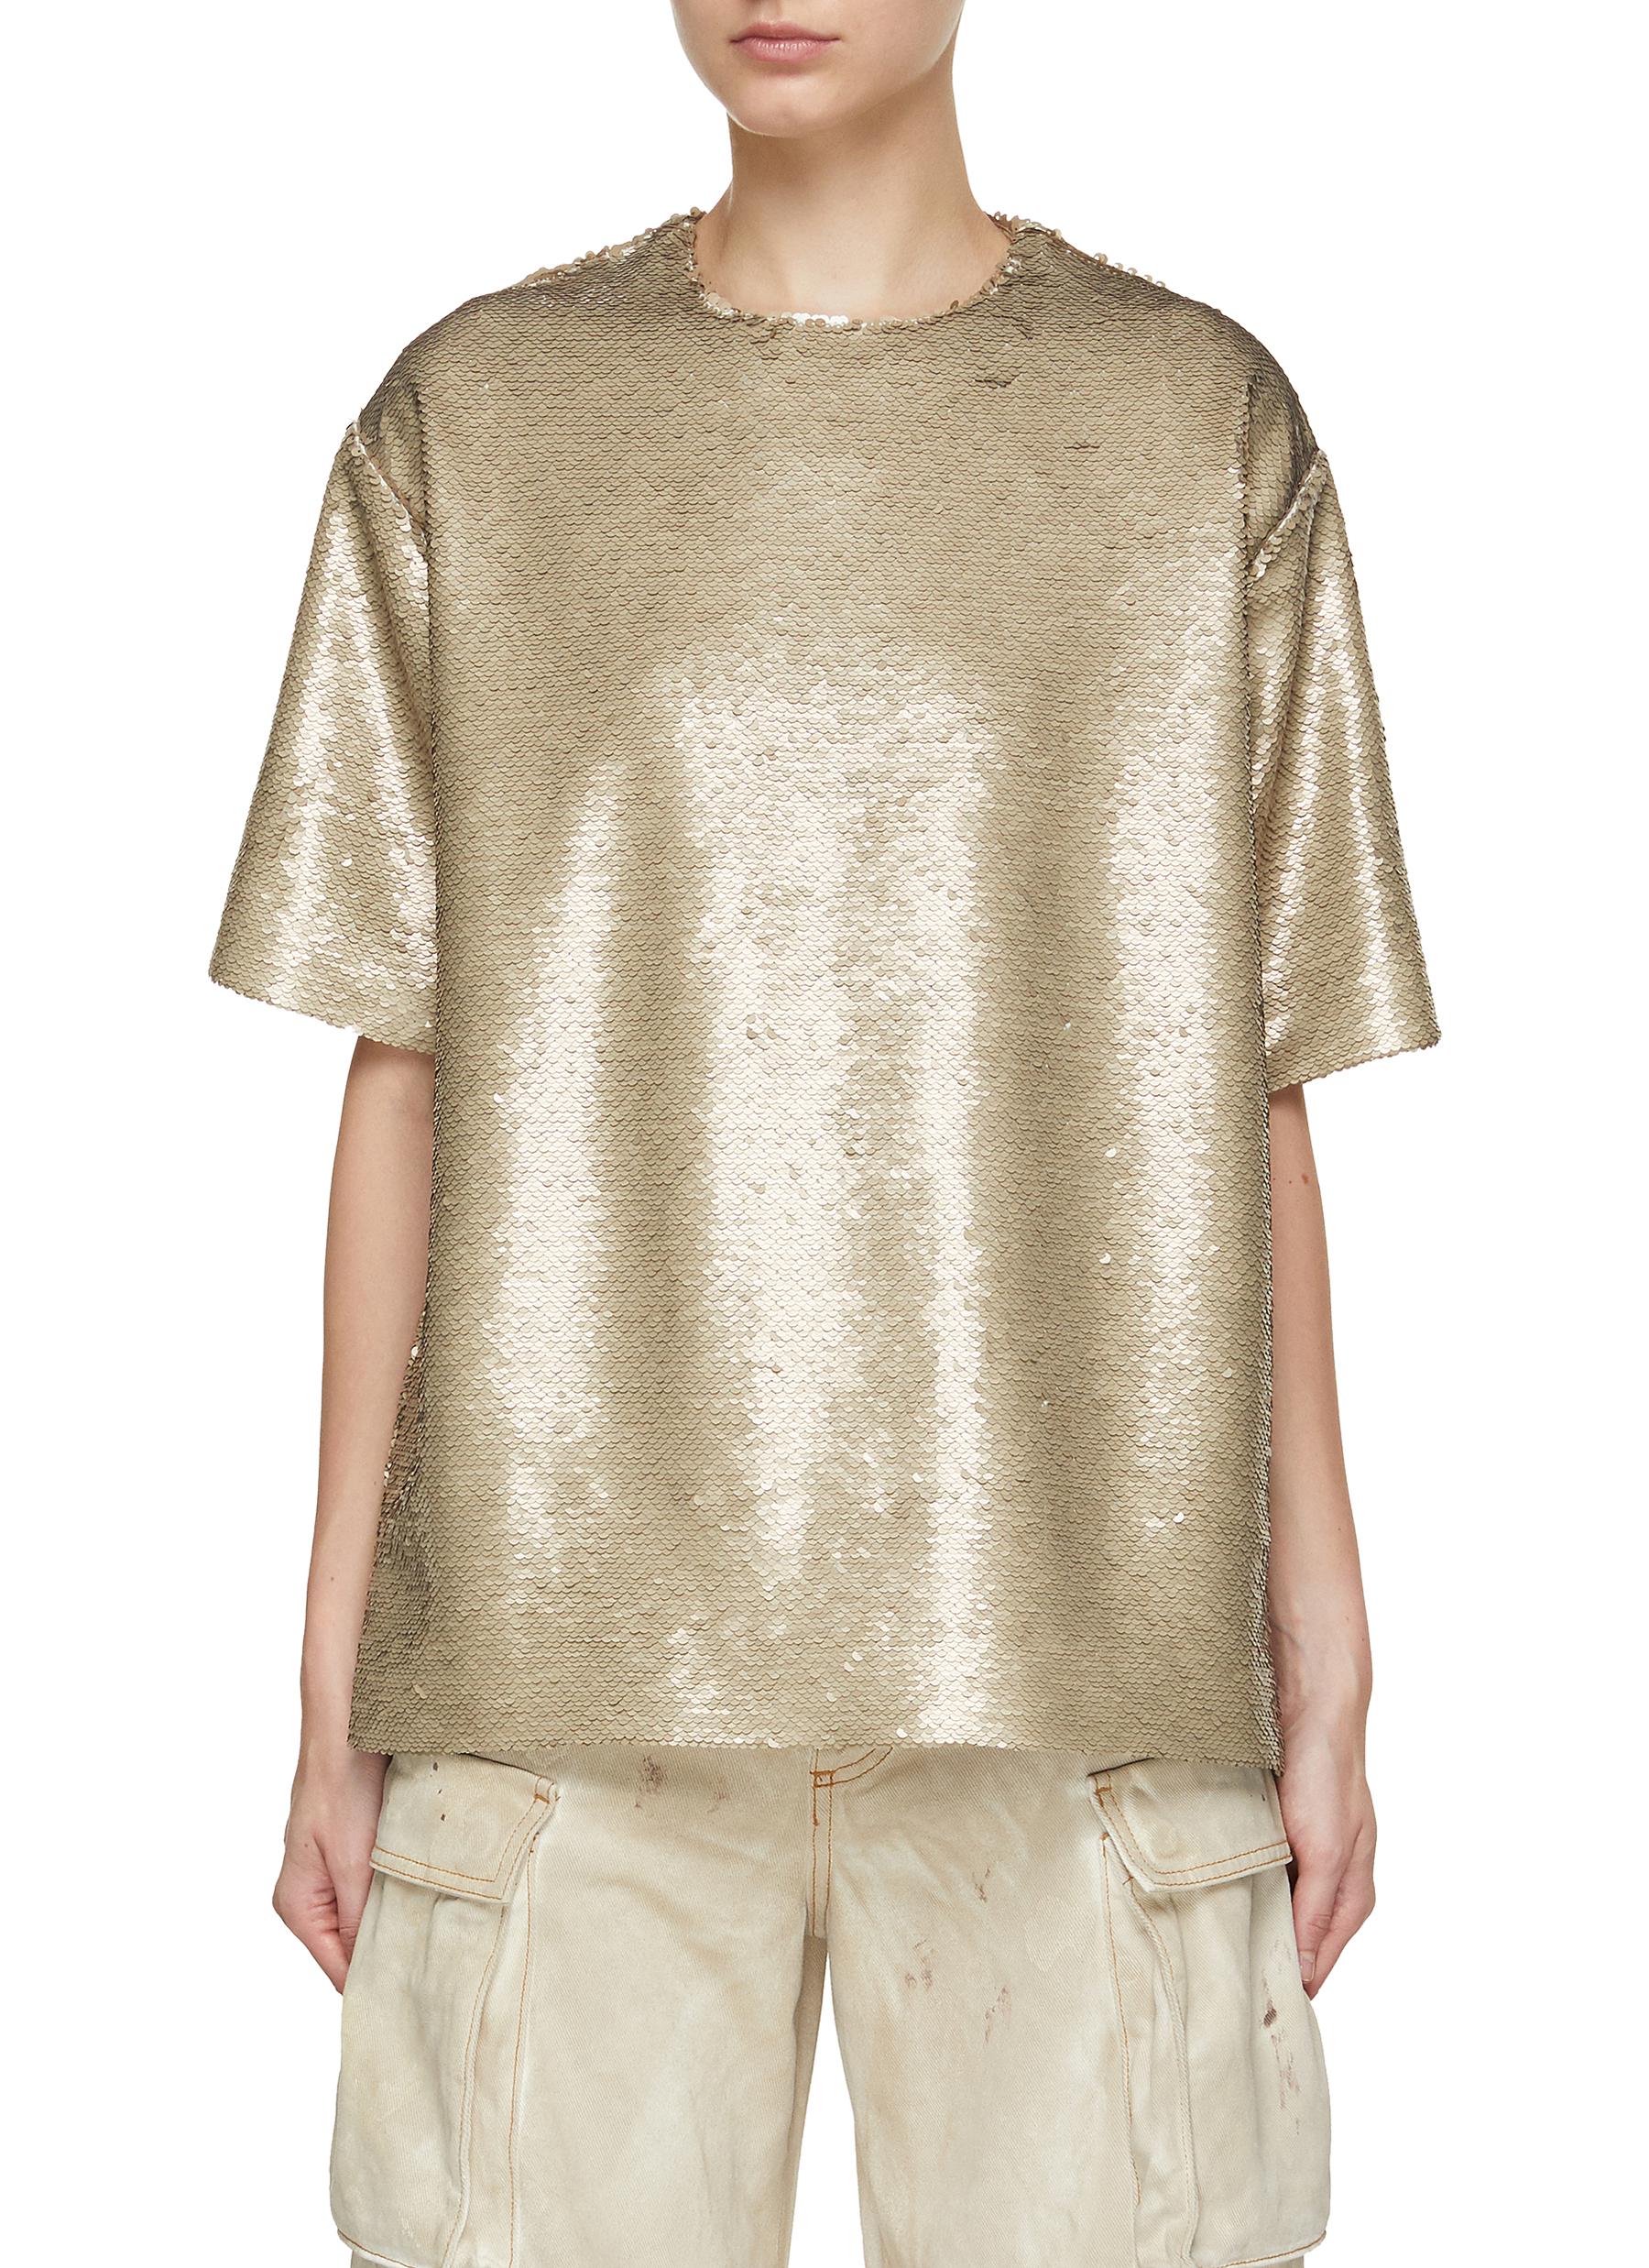 THE FRANKIE SHOP JONES SEQUINED BOXY T-SHIRT